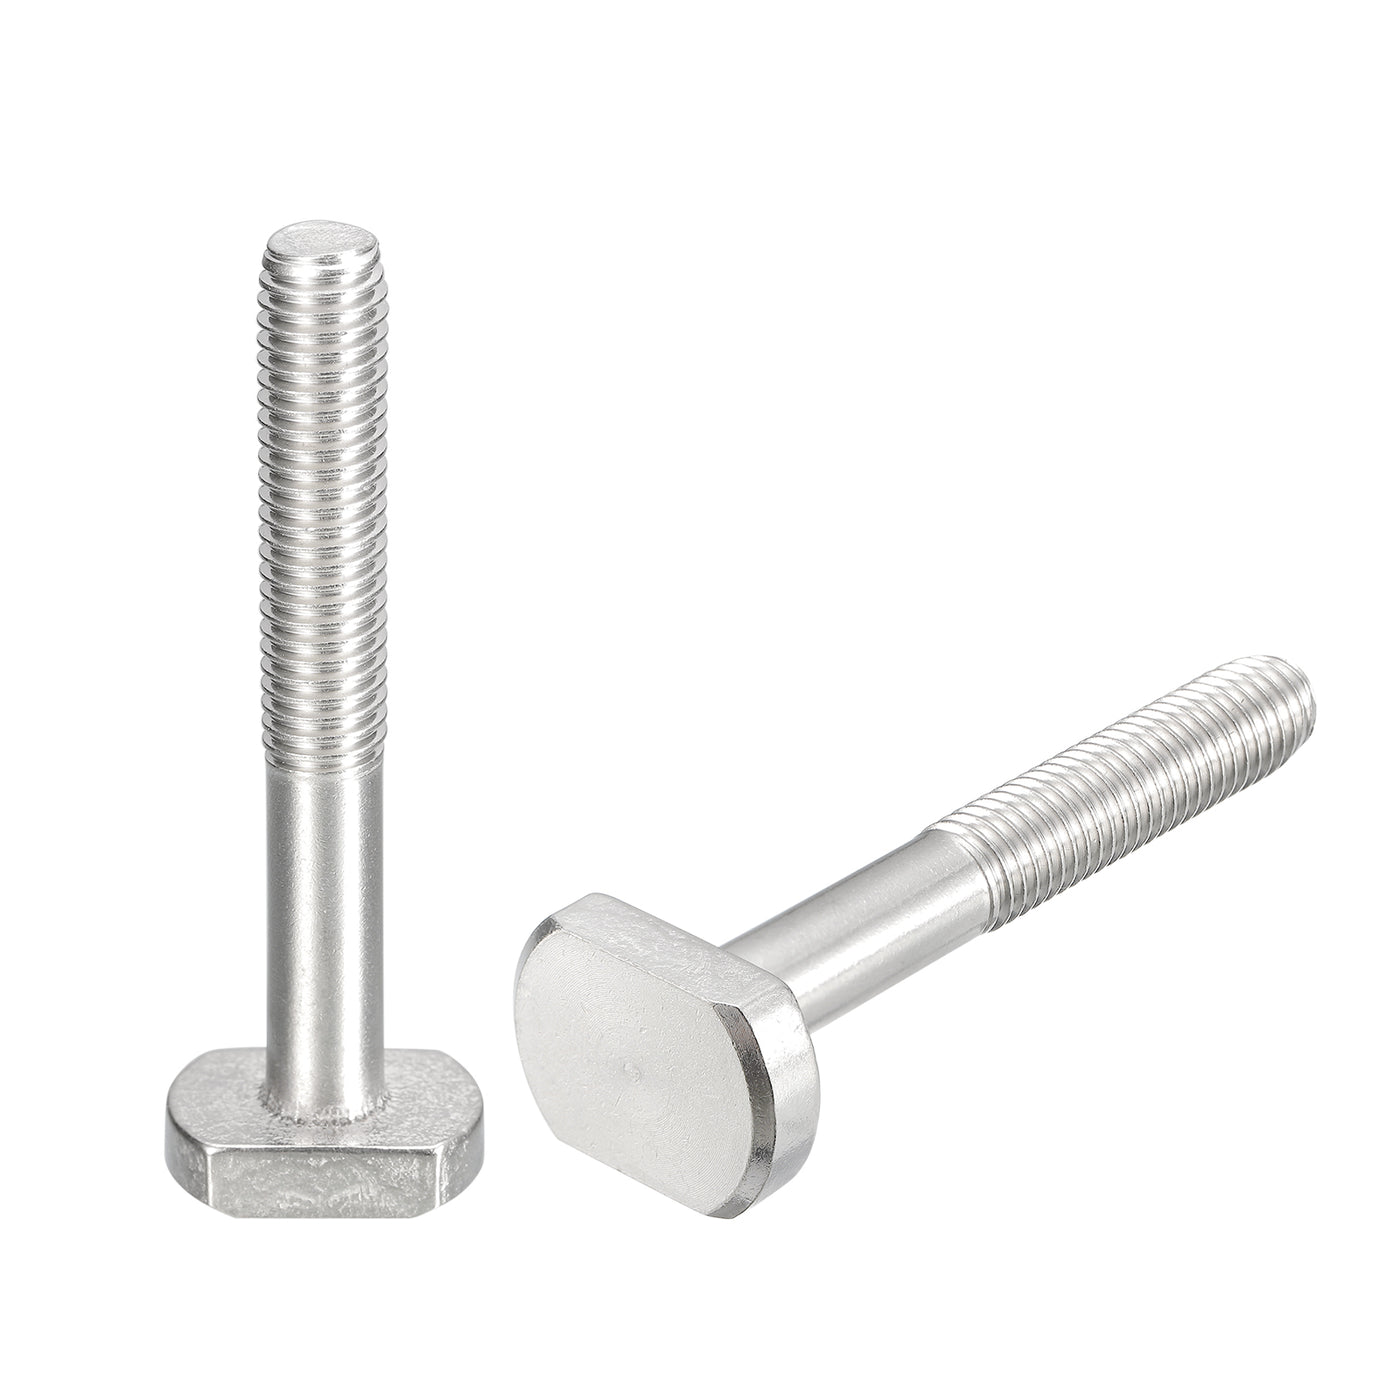 uxcell Uxcell T-Slot Bolts, 2pcs M10x70mm Drop-in Stud Sliding Bolts 304 Stainless Steel